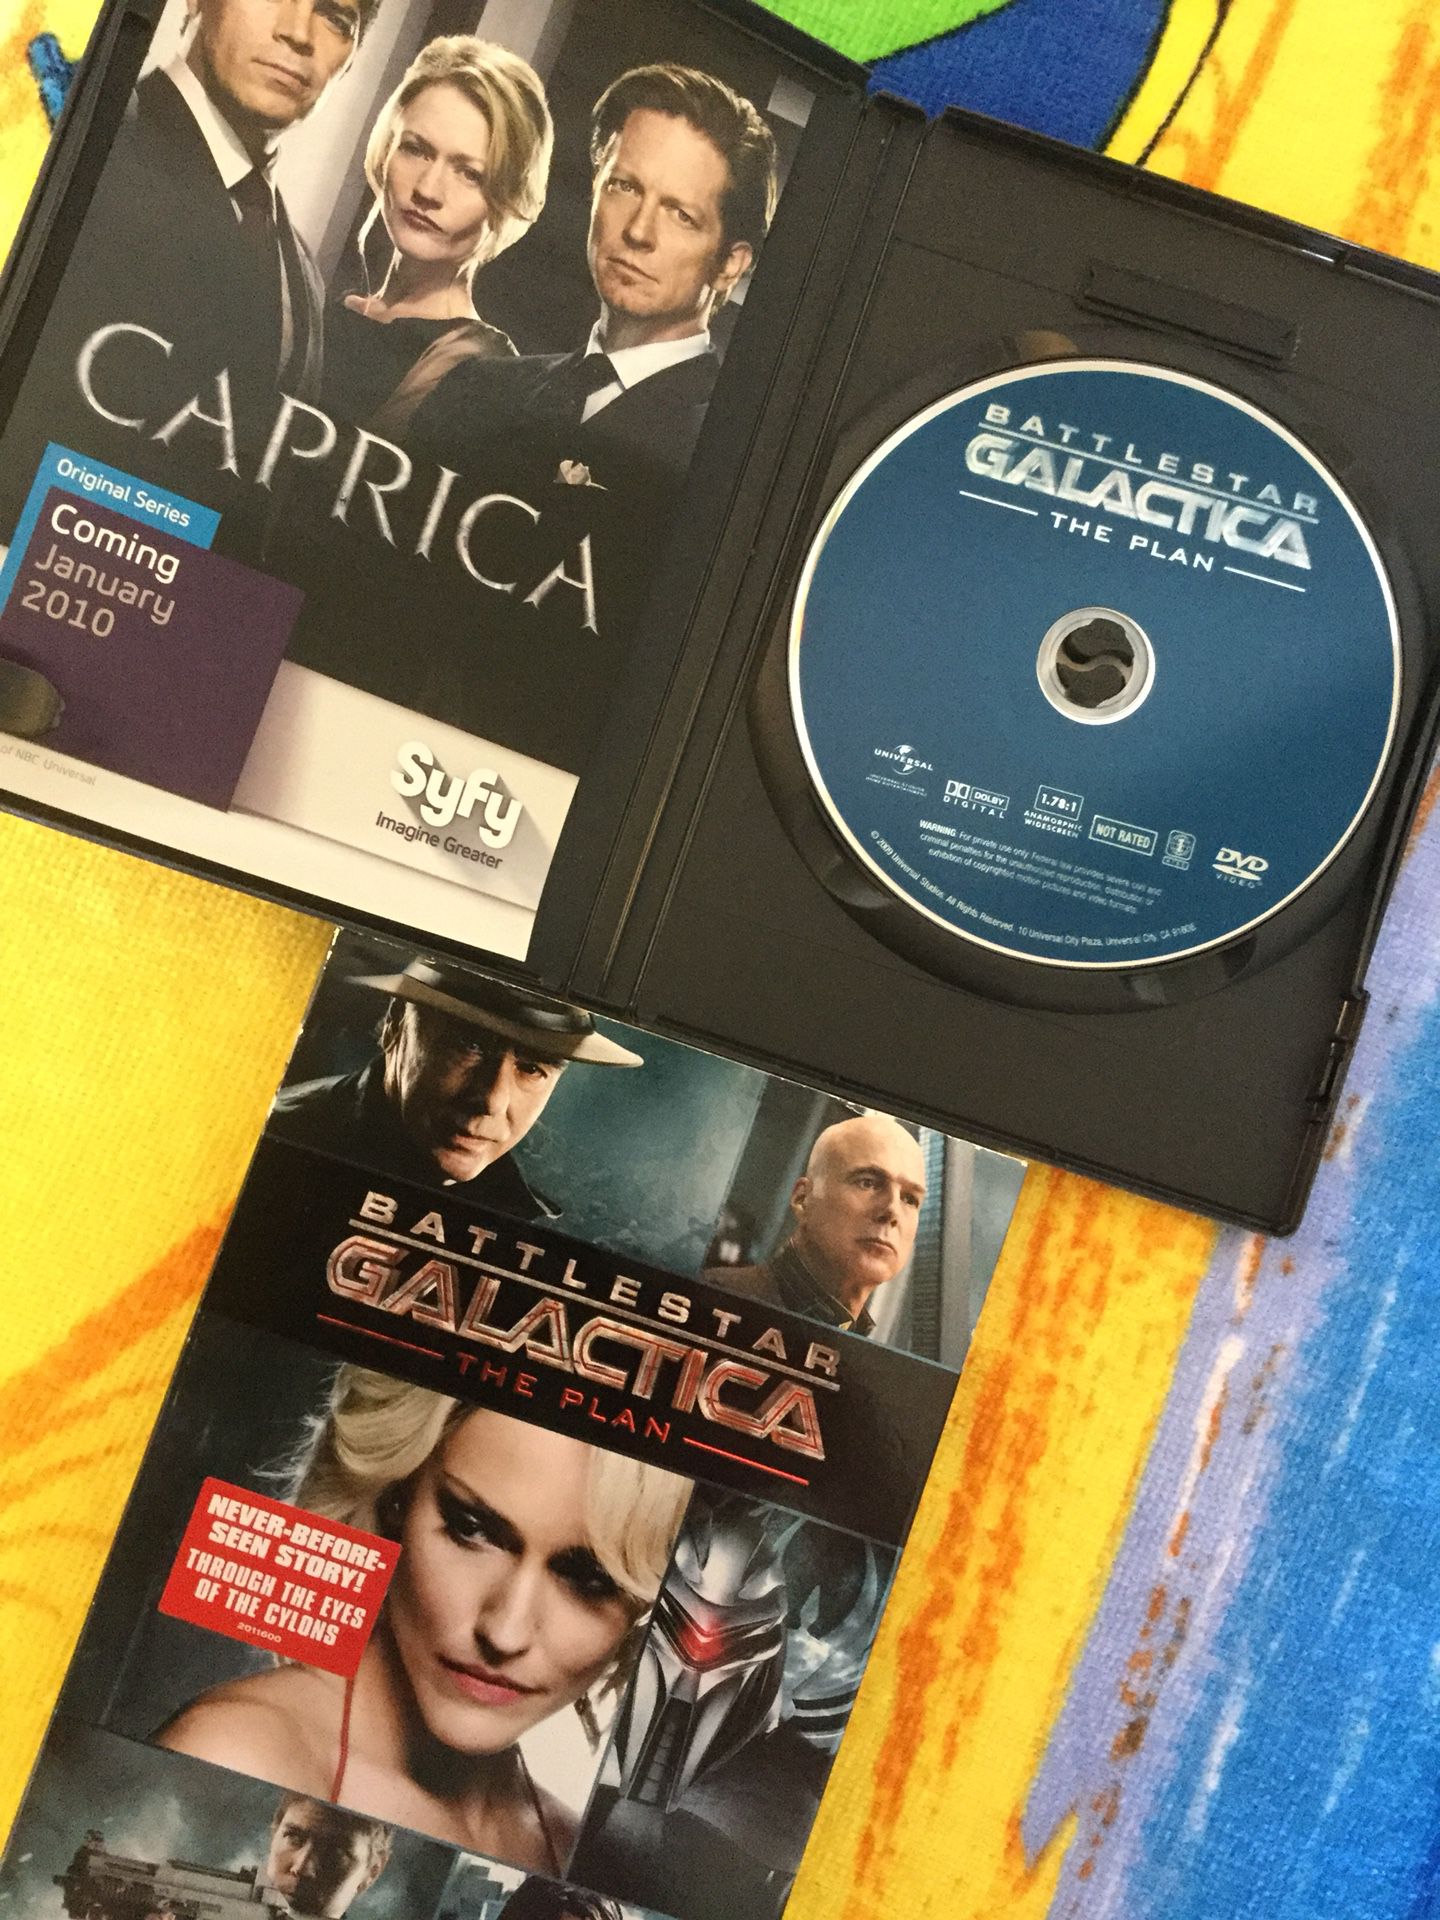 🍿🎞 😎 * THE PLAN * SCI -FI FILM DVD Battlestar Galactica very cool exiting / Visit for more 🎥🍿